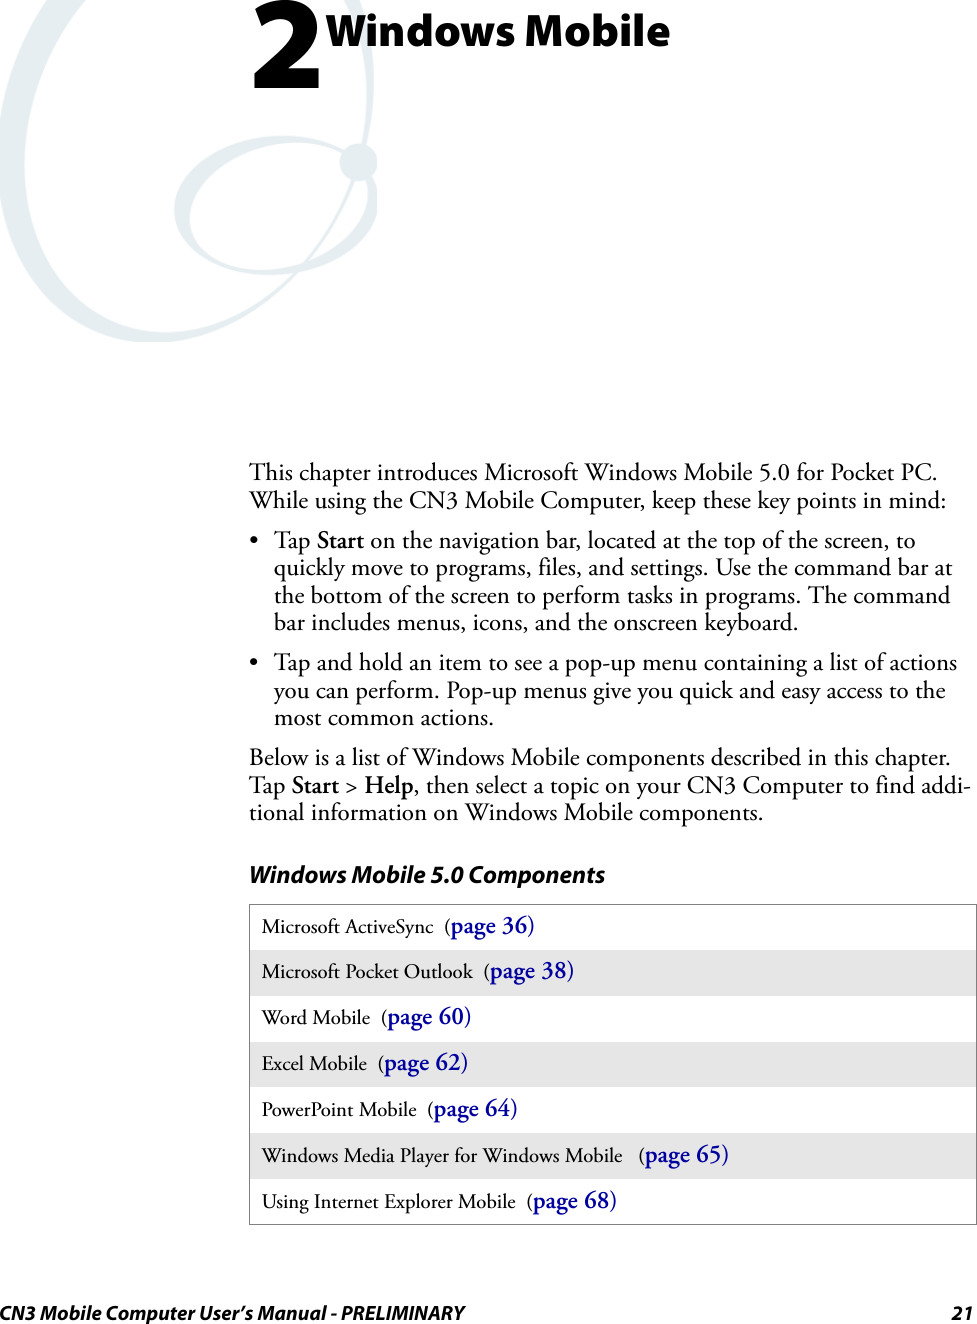 CN3 Mobile Computer User’s Manual - PRELIMINARY 212Windows MobileThis chapter introduces Microsoft Windows Mobile 5.0 for Pocket PC. While using the CN3 Mobile Computer, keep these key points in mind:•Tap Start on the navigation bar, located at the top of the screen, to quickly move to programs, files, and settings. Use the command bar at the bottom of the screen to perform tasks in programs. The command bar includes menus, icons, and the onscreen keyboard.• Tap and hold an item to see a pop-up menu containing a list of actions you can perform. Pop-up menus give you quick and easy access to the most common actions.Below is a list of Windows Mobile components described in this chapter. Tap Start &gt; Help, then select a topic on your CN3 Computer to find addi-tional information on Windows Mobile components.Windows Mobile 5.0 ComponentsMicrosoft ActiveSync  (page 36)Microsoft Pocket Outlook  (page 38)Word Mobile  (page 60)Excel Mobile  (page 62)PowerPoint Mobile  (page 64)Windows Media Player for Windows Mobile   (page 65)Using Internet Explorer Mobile  (page 68)